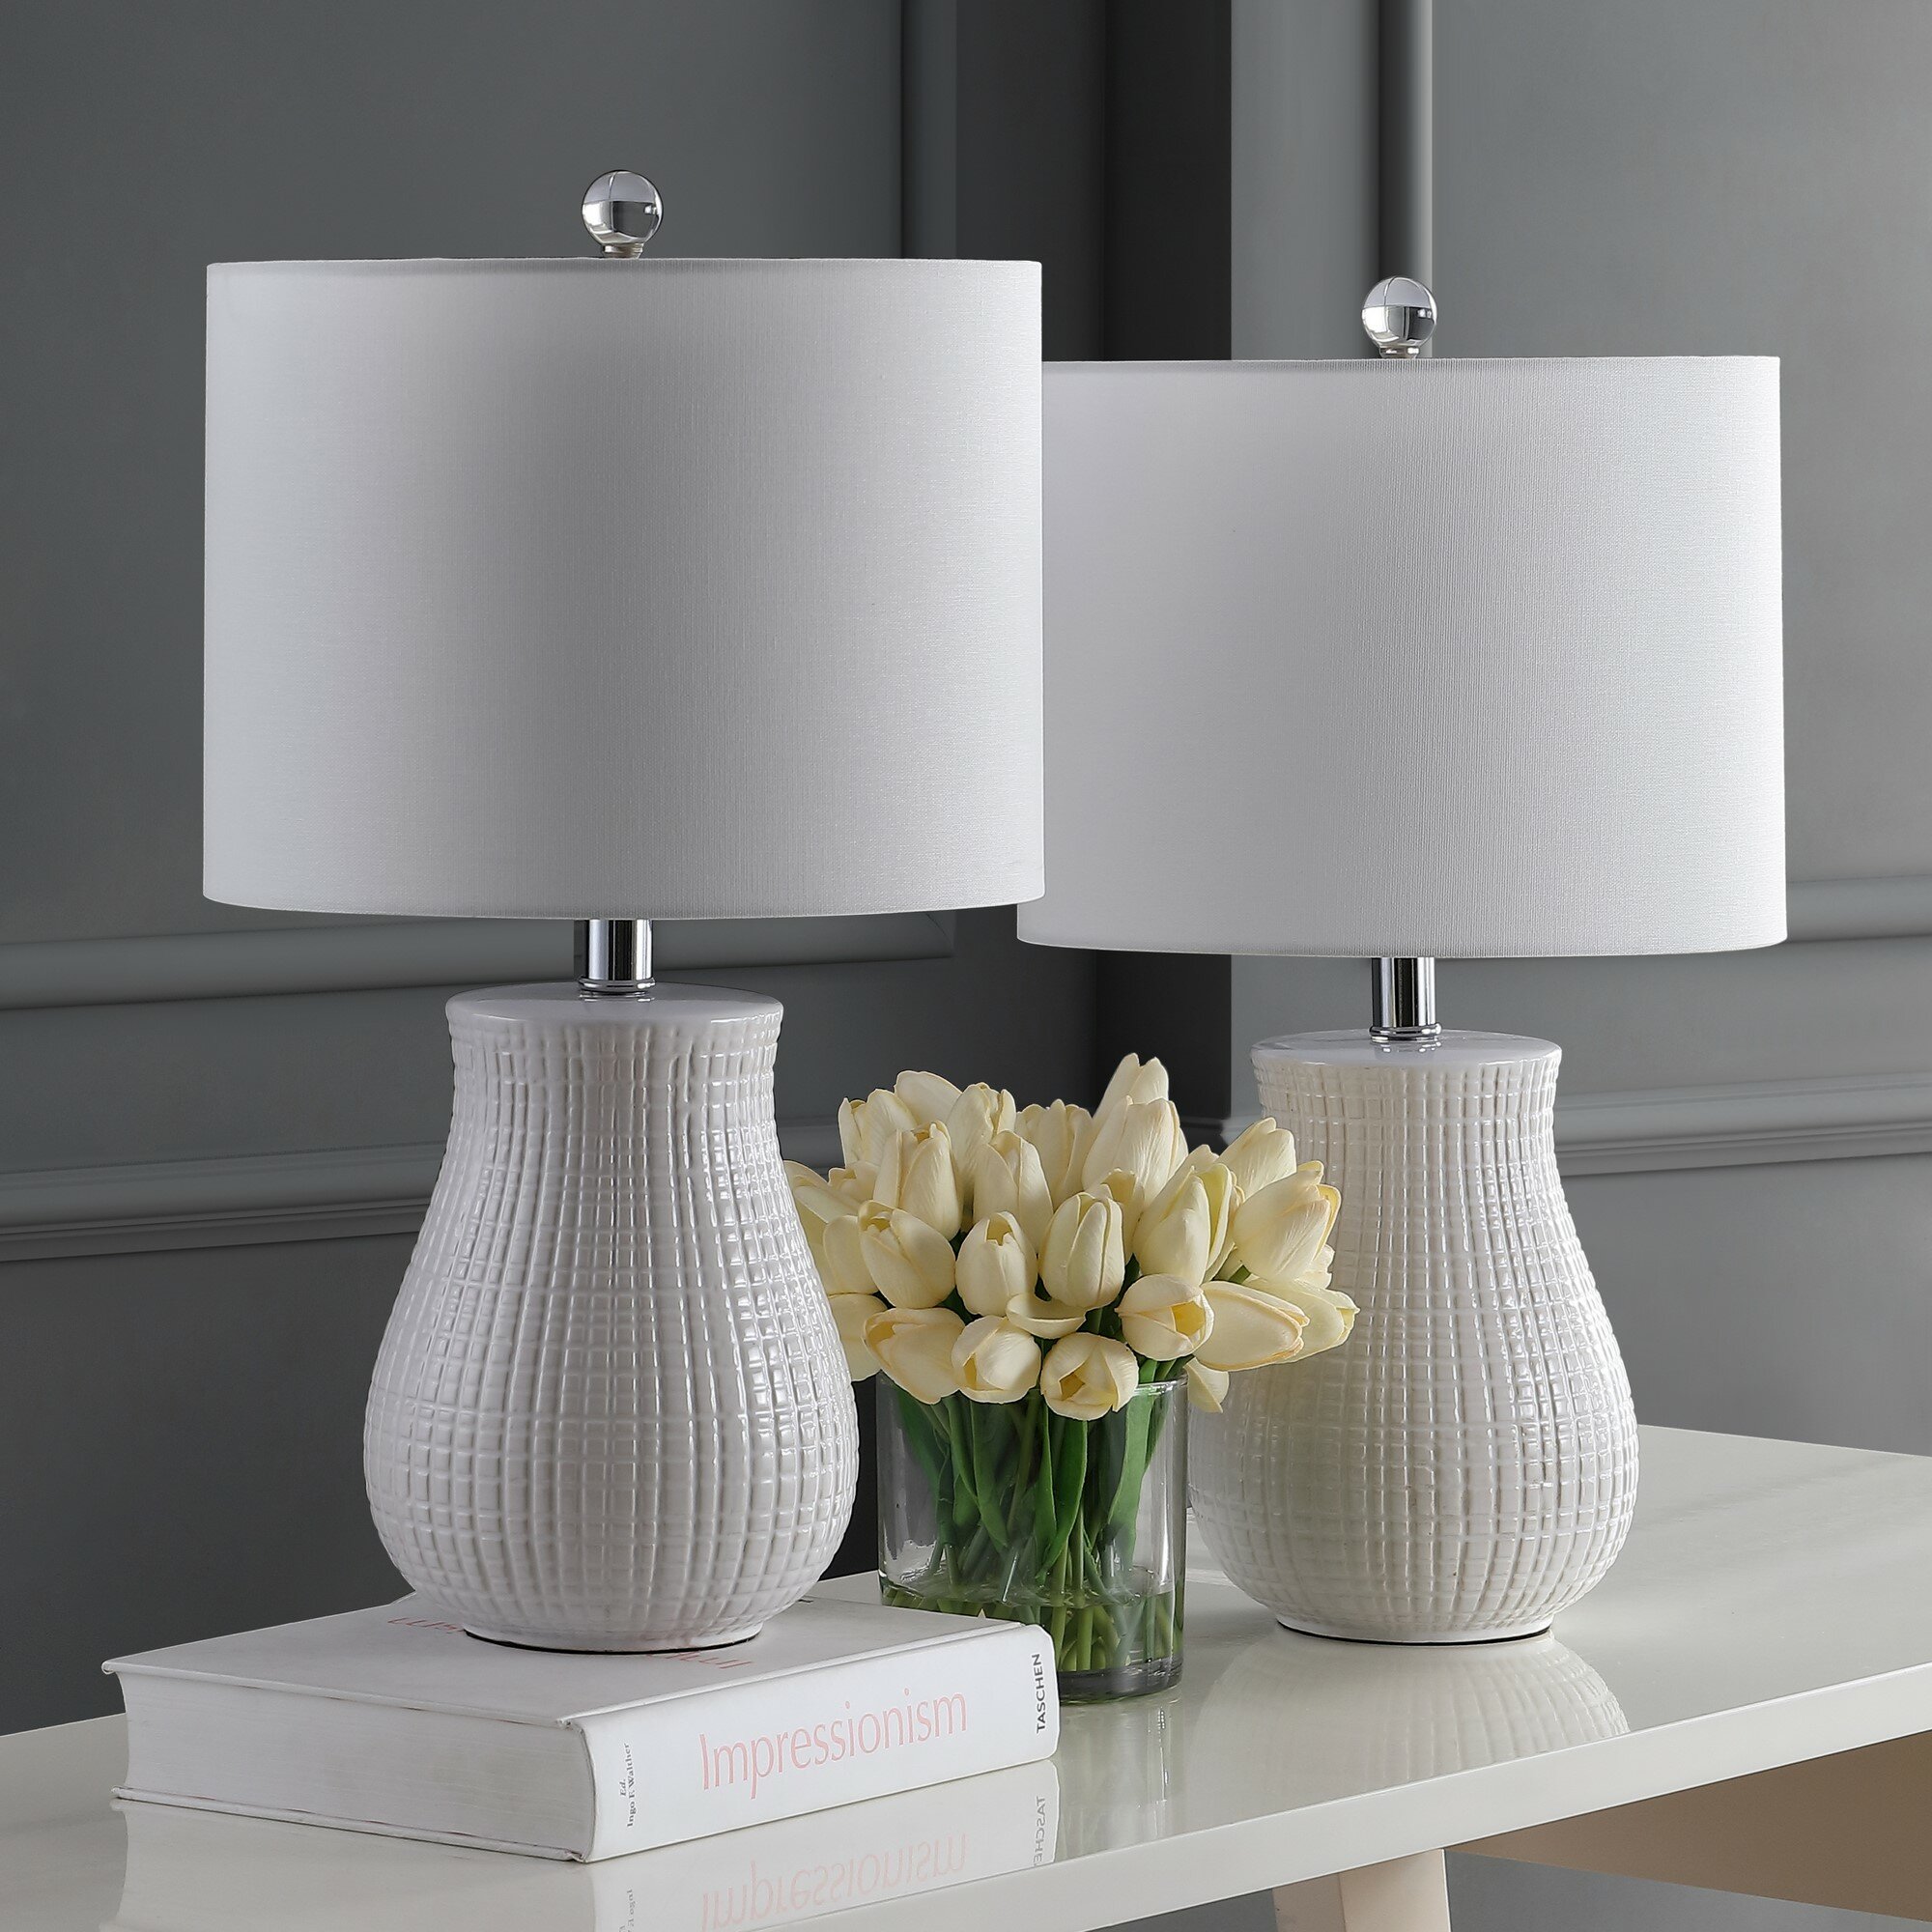 Highland Dunes Ahrens White Table Lamp 